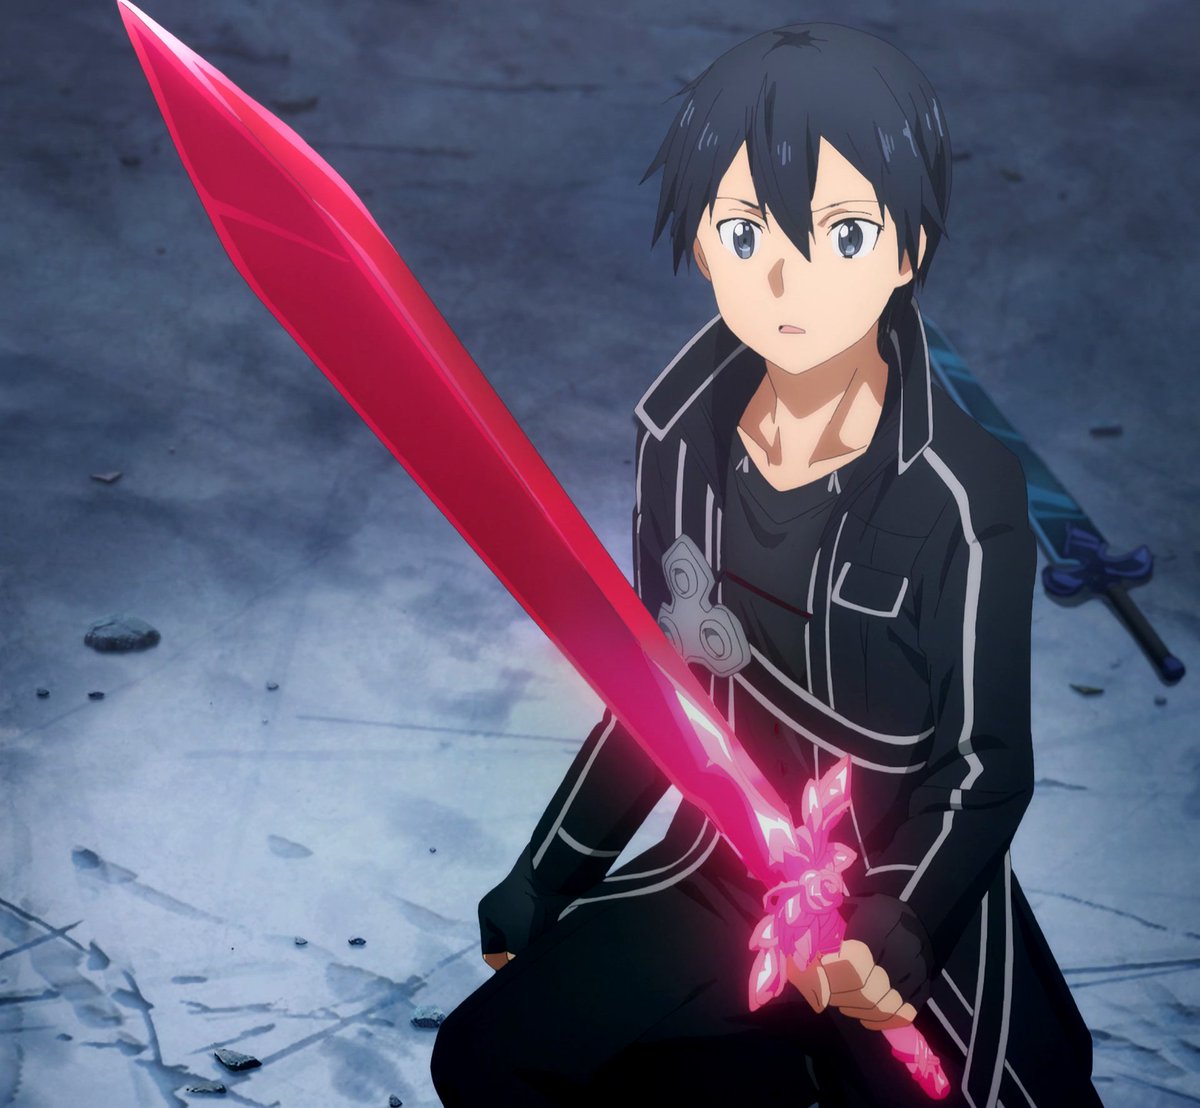 To get a bit more attention, I remembered it when cleaning my Drive, still interested for merged shots I did during #SwordArtOnline Alicization Anime?
Sat down for an hour & did these from Episode 24, where I left off. 
Starting with Red Rose Sword'd Black Swordsman!
#sao_anime